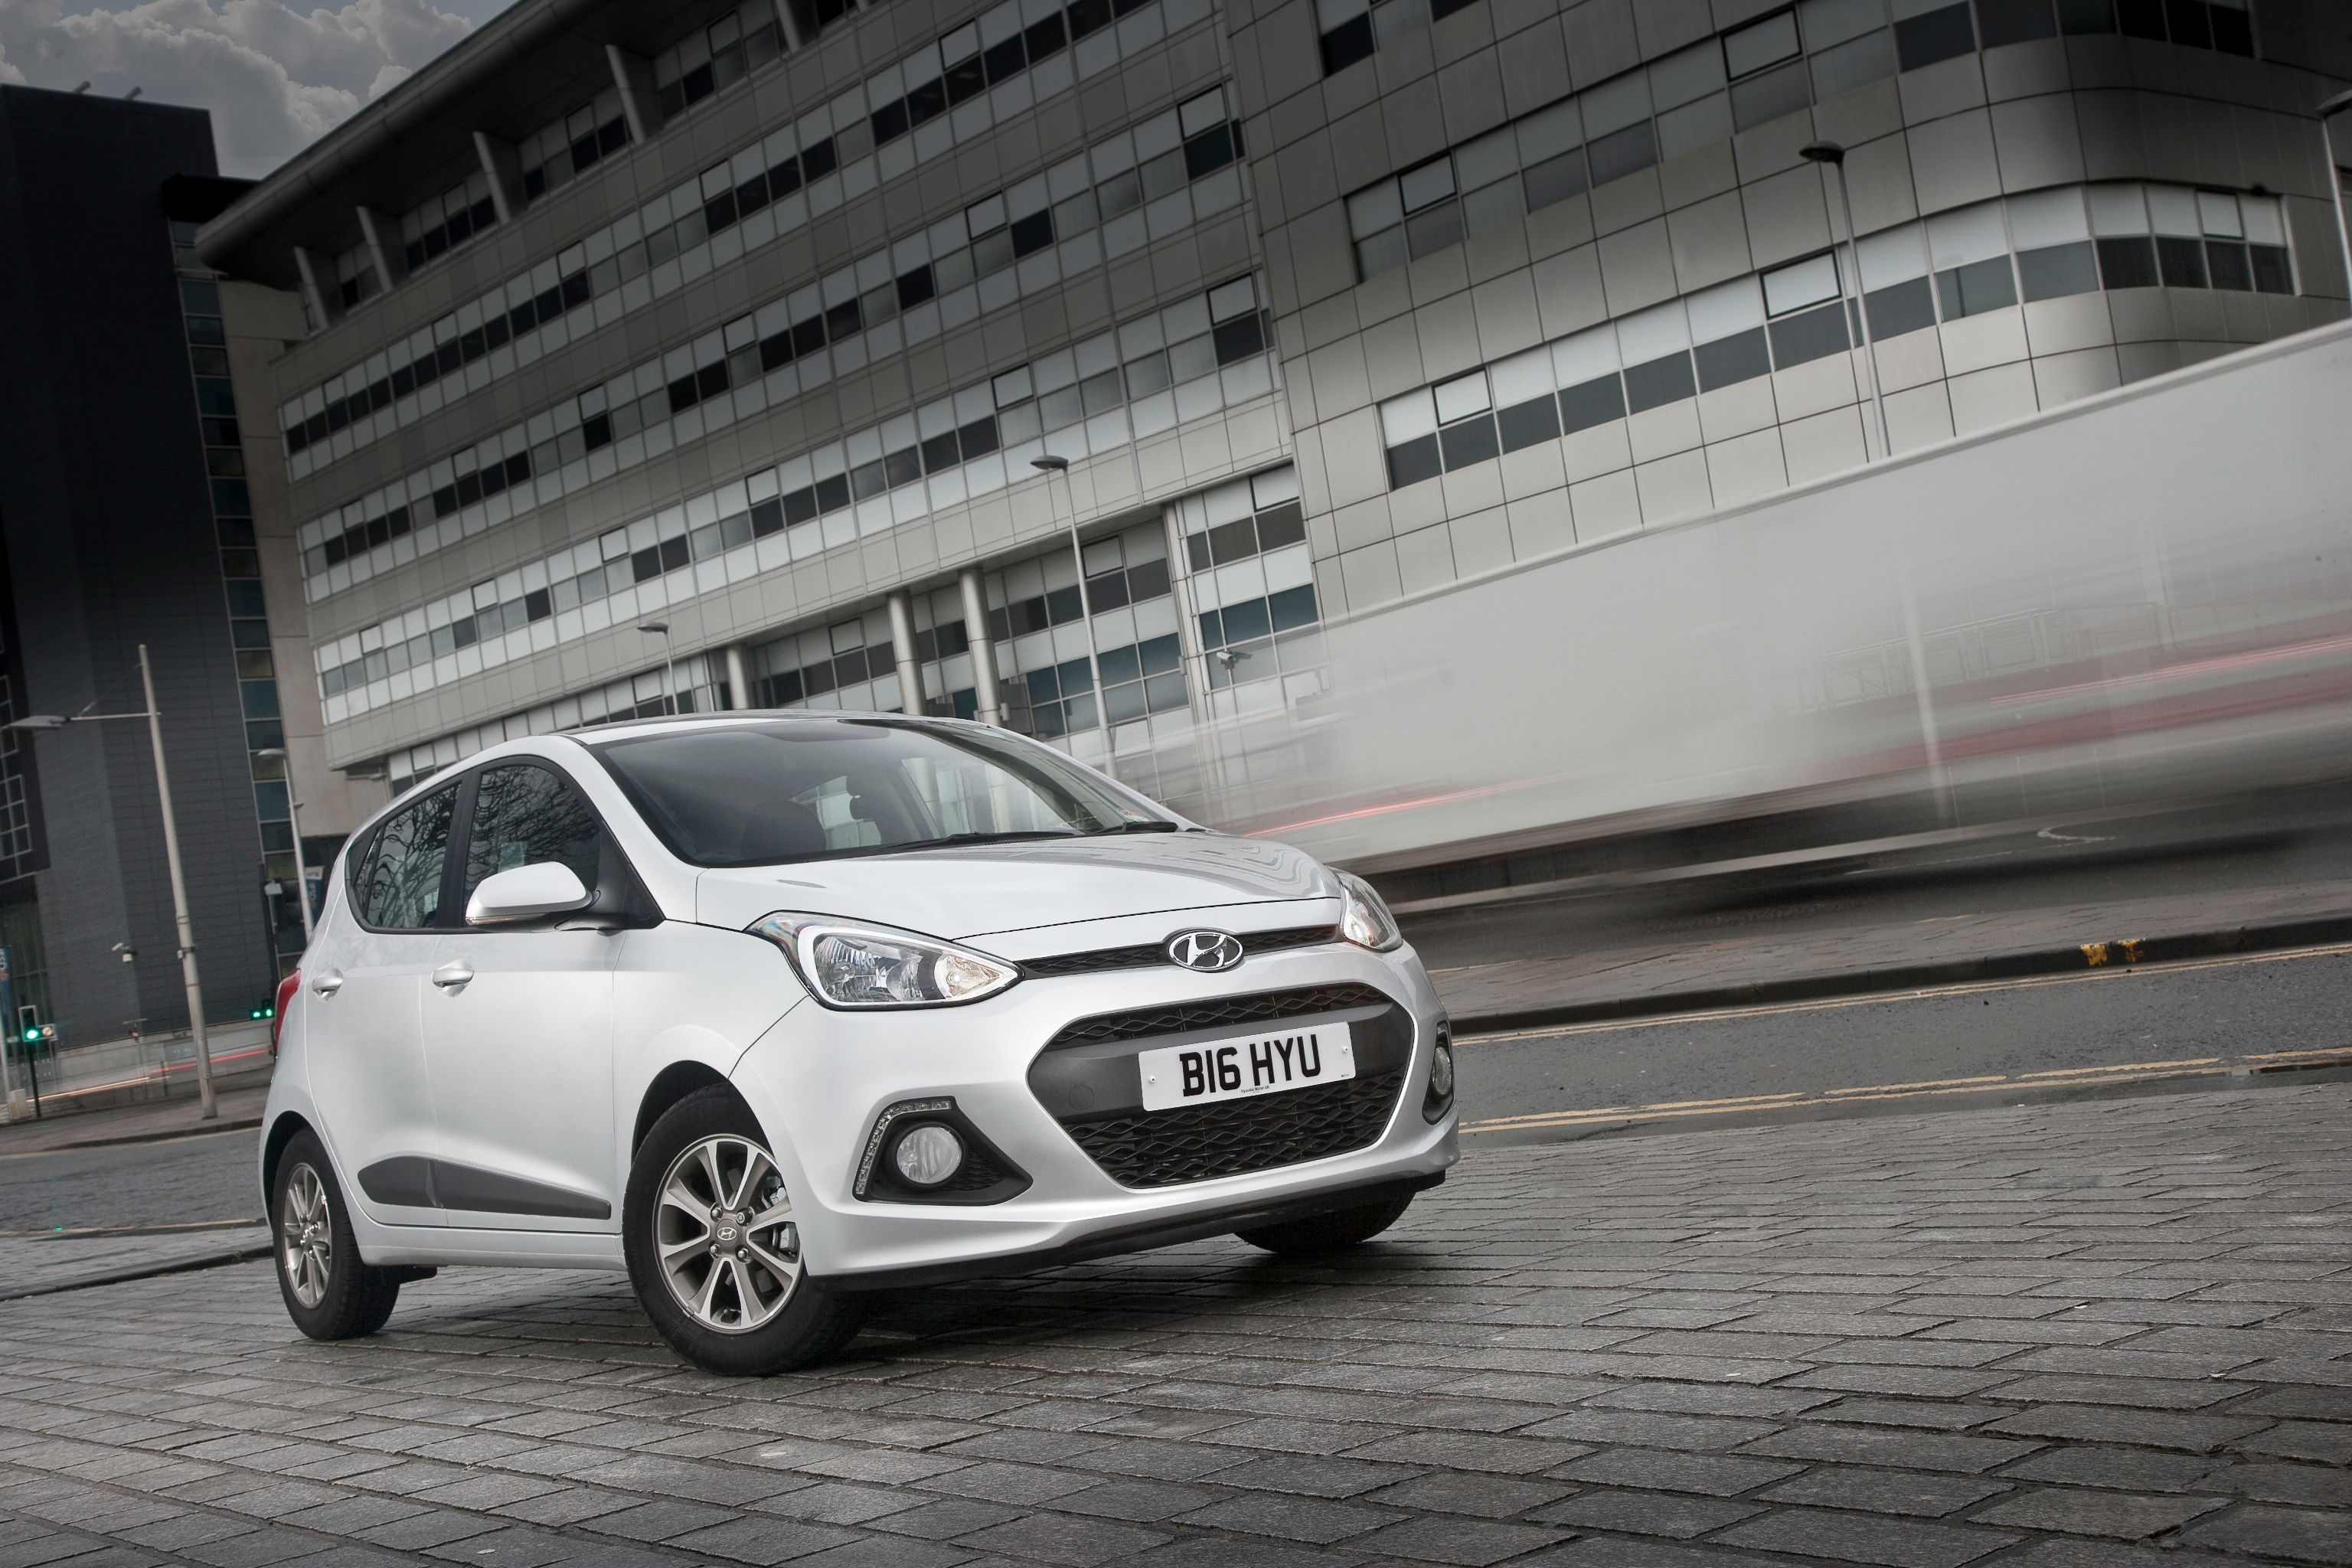 Hyundai i10 is the most reliable supermini, according to Auto Express readers